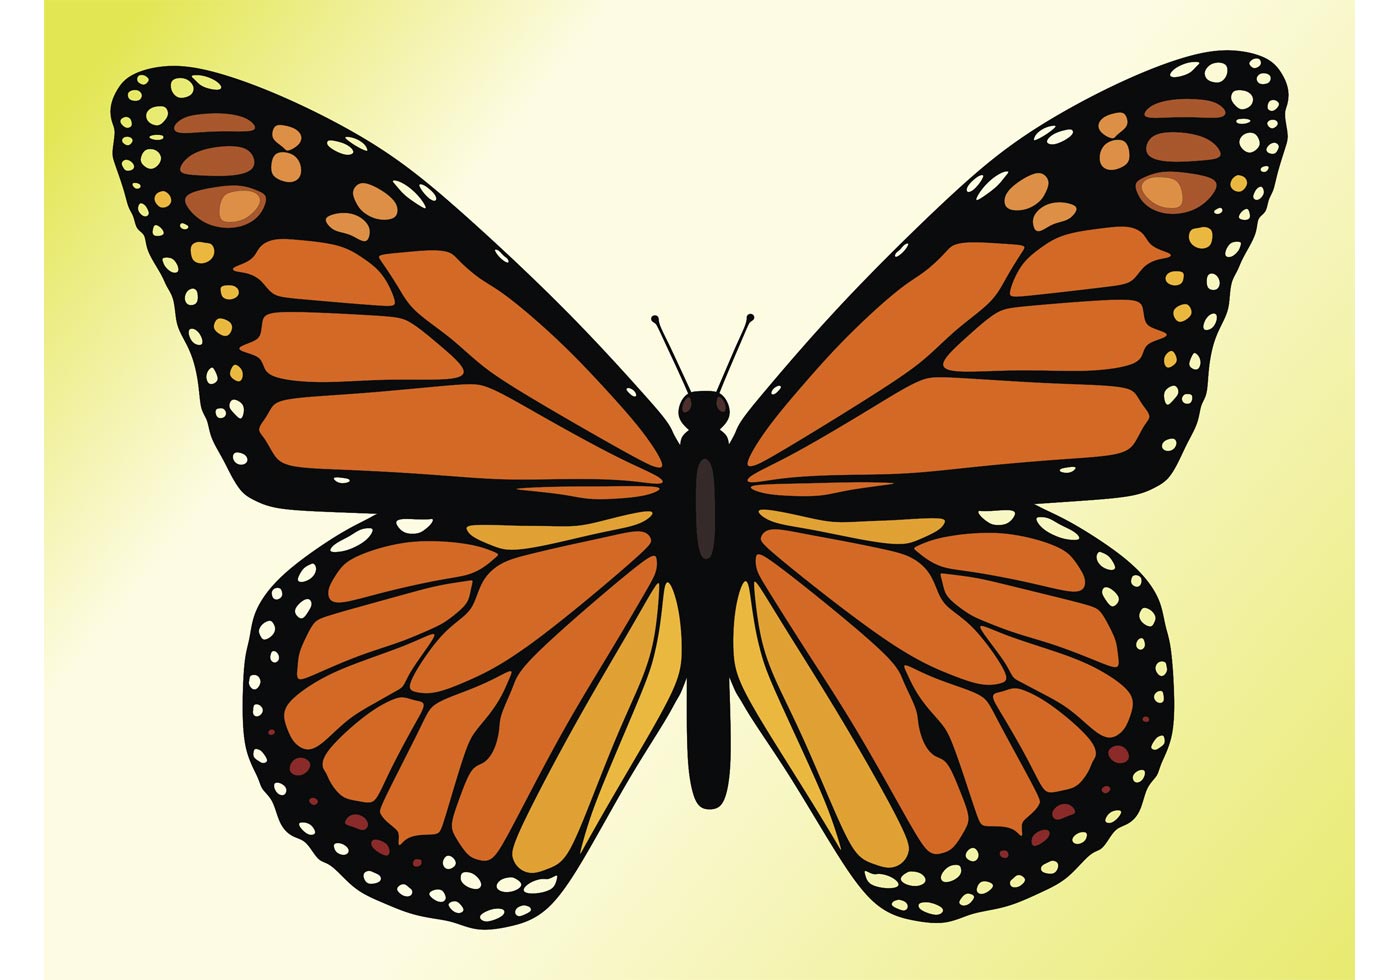 Download Monarch Butterfly - Download Free Vector Art, Stock ...